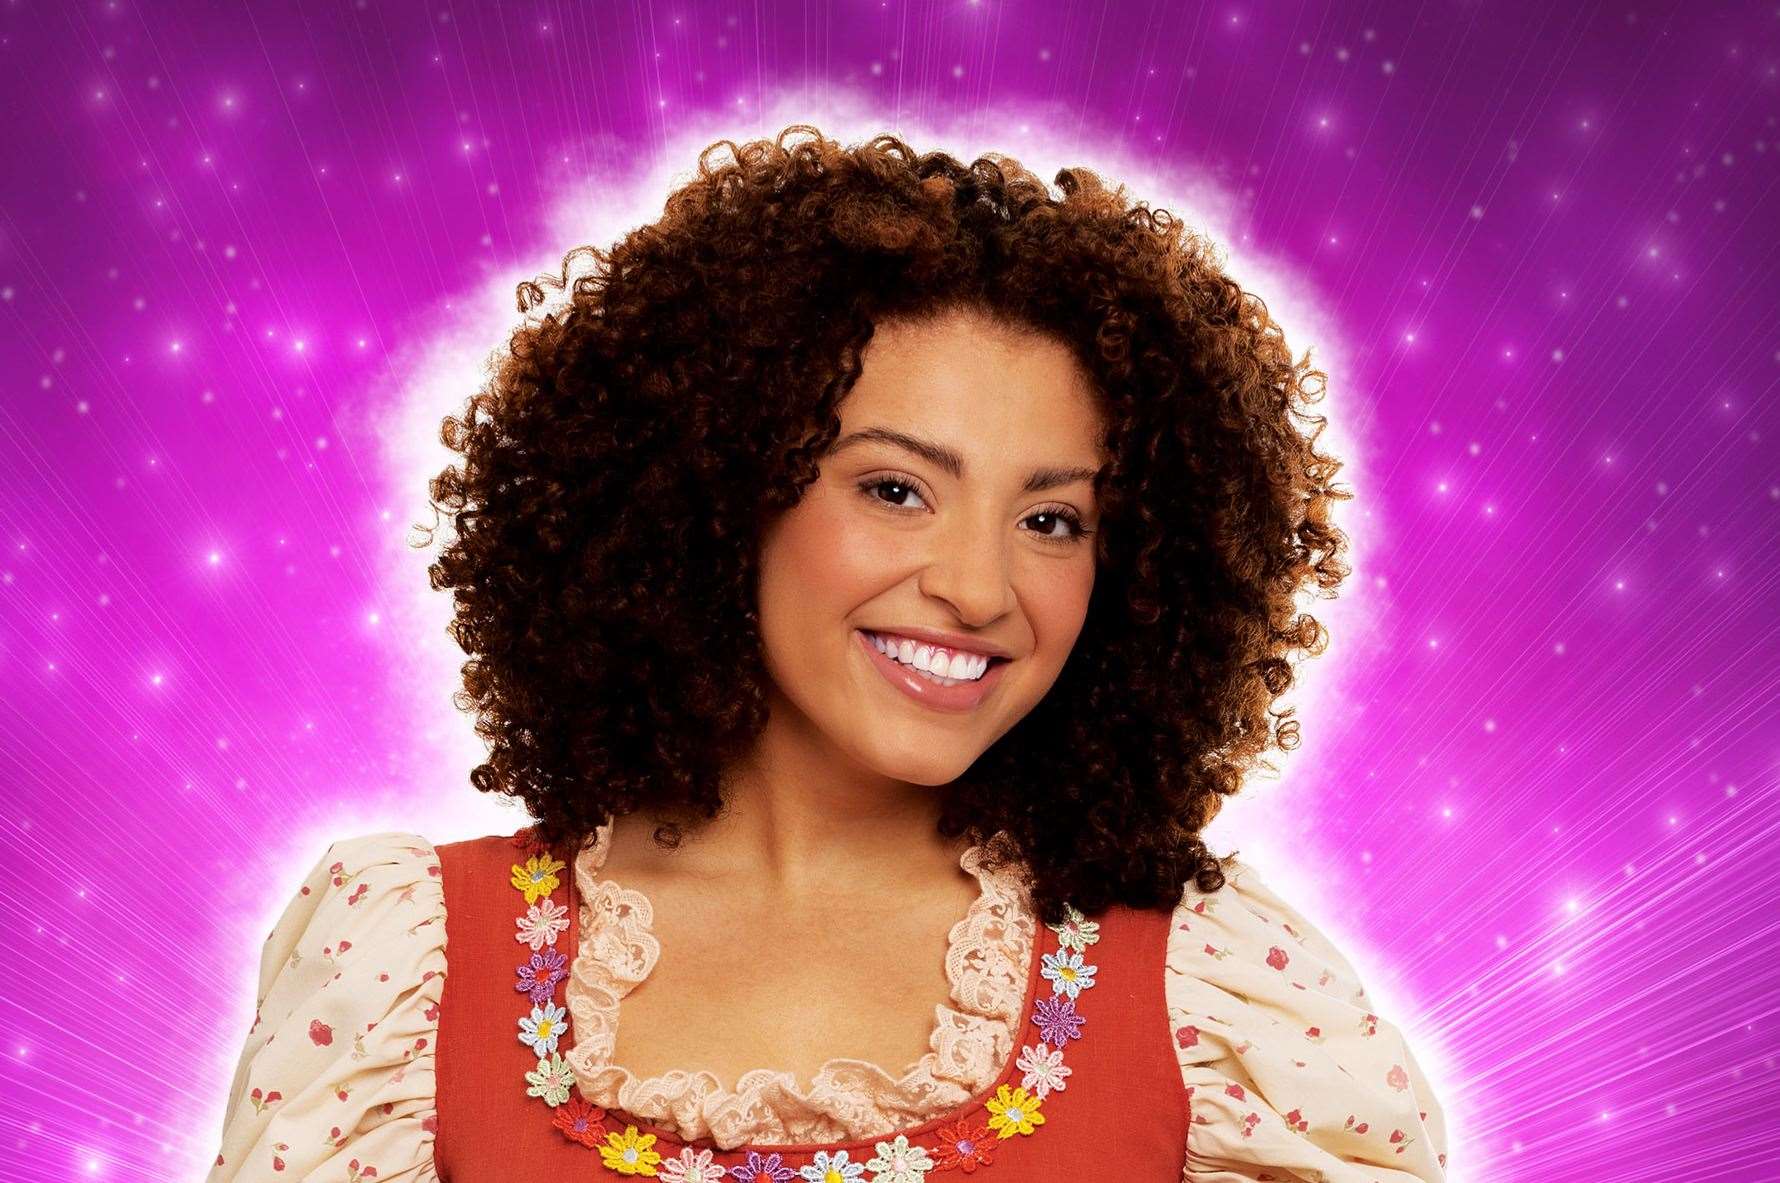 Newcomer Ellie Jane Grant will star in the panto's title role